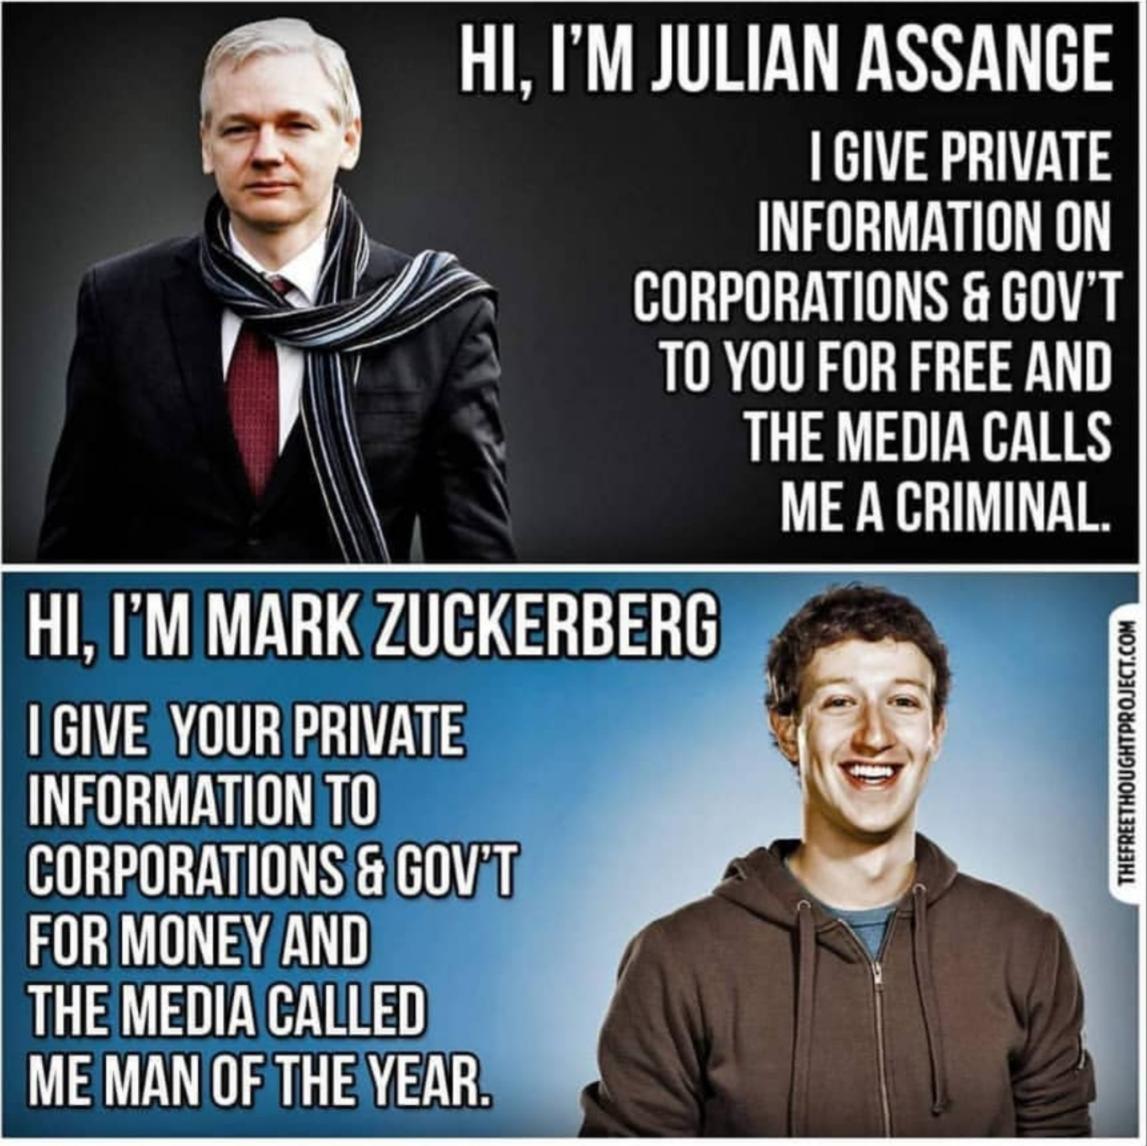 assange zuckerberg meme - Hi, I'M Julian Assange Tgive Private Information On Corporations & Gov'T To You For Free And The Media Calls Me A Criminal. Hi, I'M Mark Zuckerberg I Give Your Private Information To Corporations & Gov'T For Money And The Media C